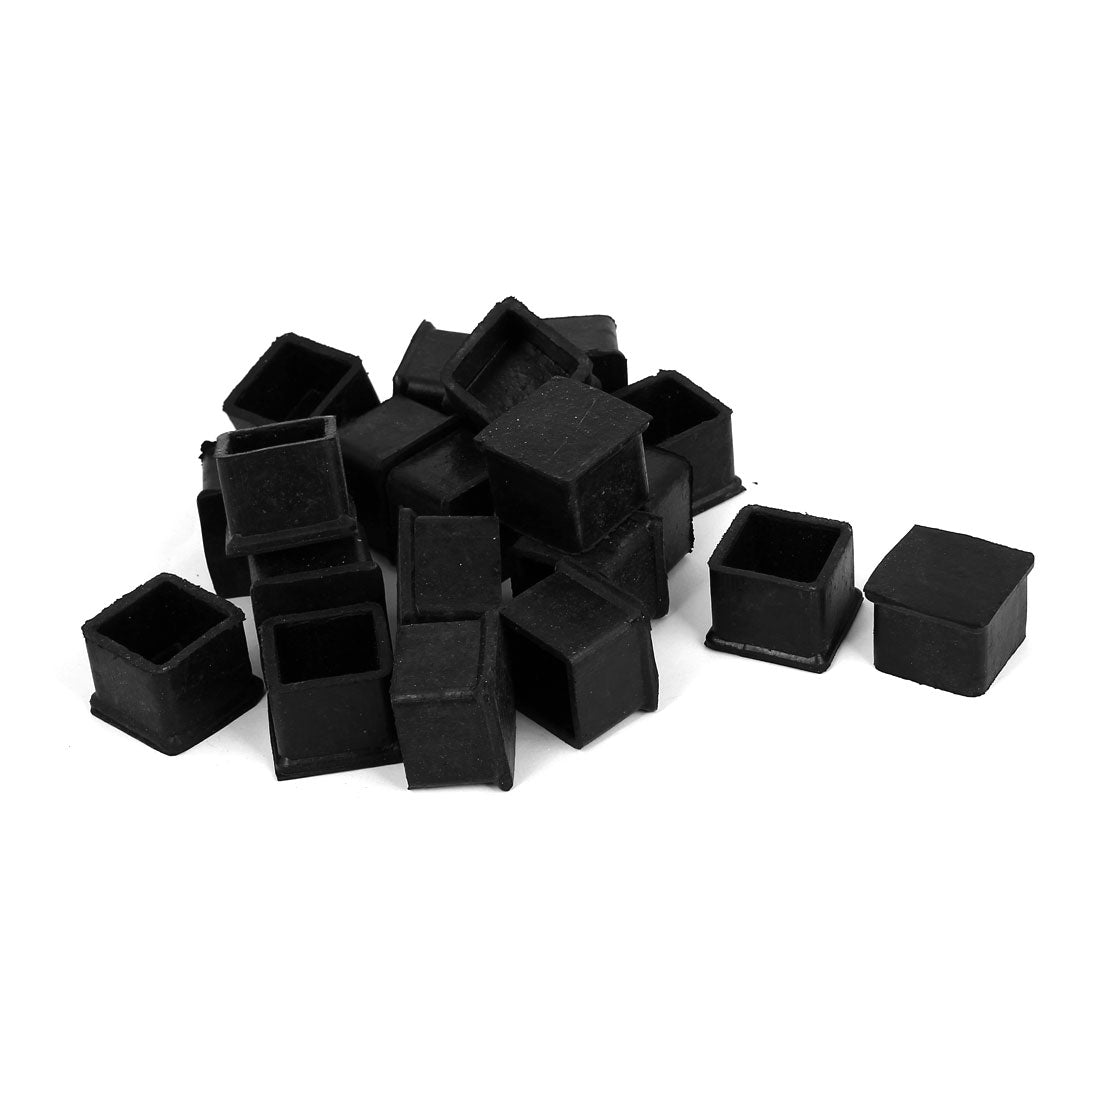 uxcell Uxcell 25mmx25mm Furniture Desk Foot Cover Rubber Square Cap Floor Protector 20Pcs